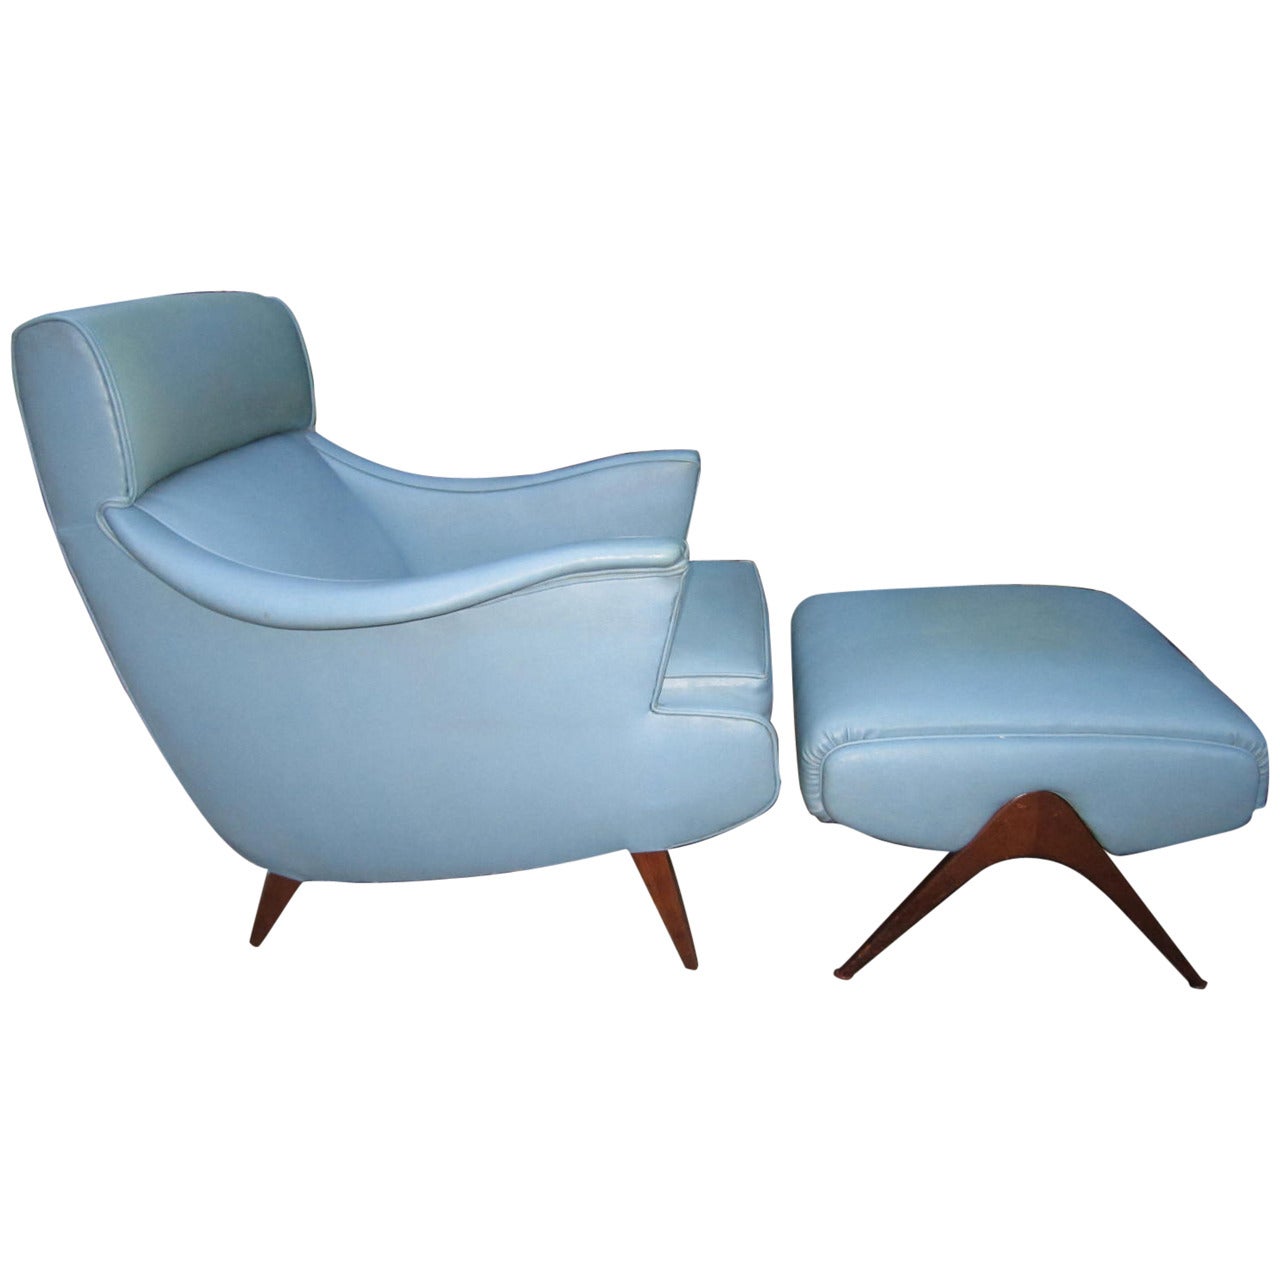 Exciting Mid-Century Modern Lounge Chair with Ottoman